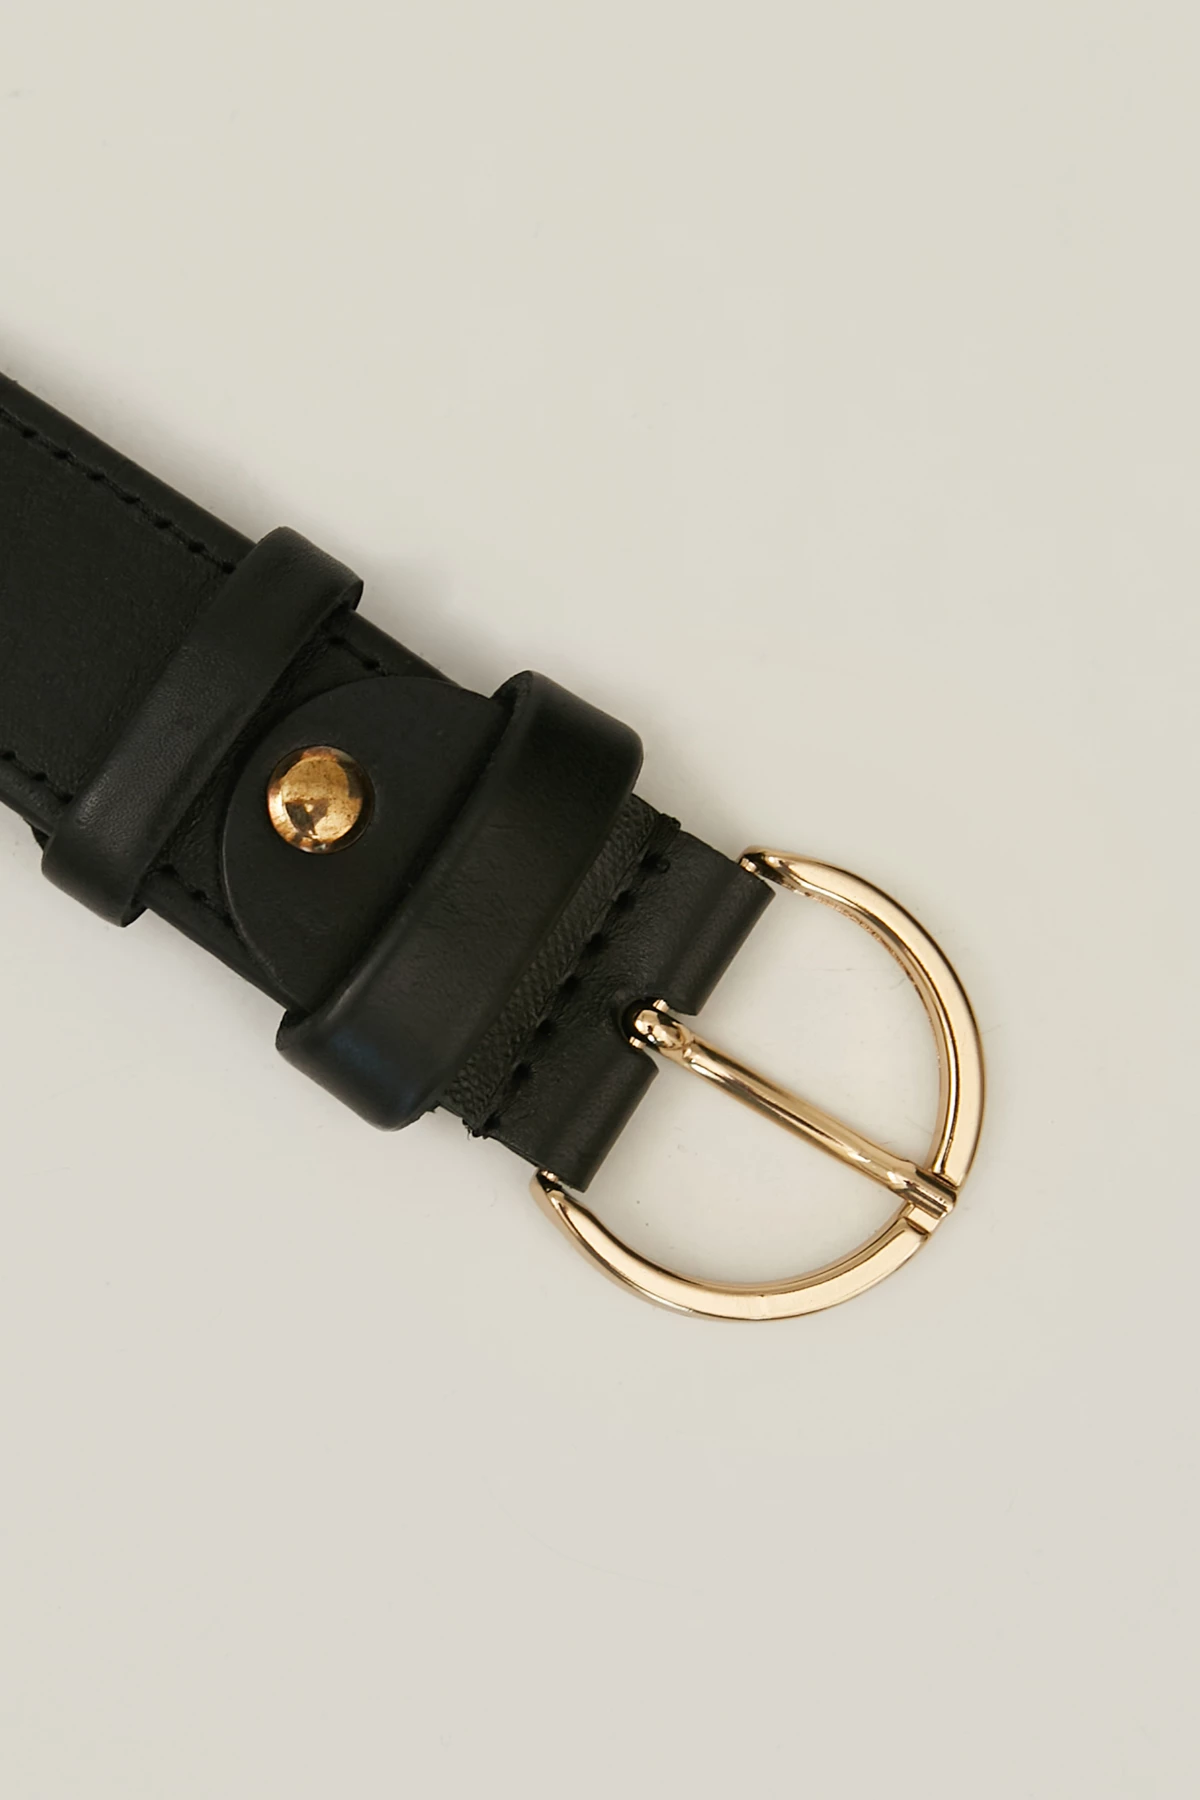 Black genuine leather belt with a golden metallic buckle, photo 2